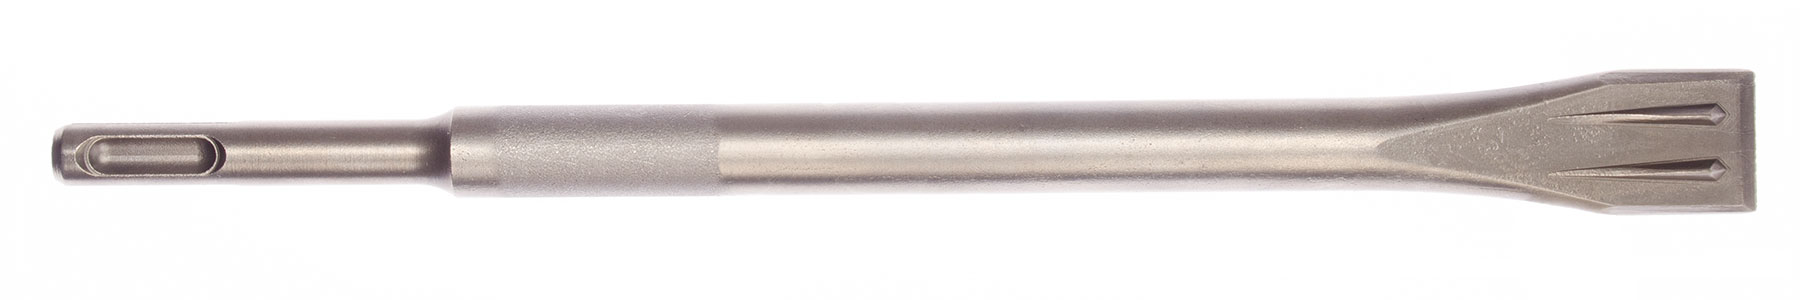 PROFESSIONAL Flat chisel with SDS-plus shank